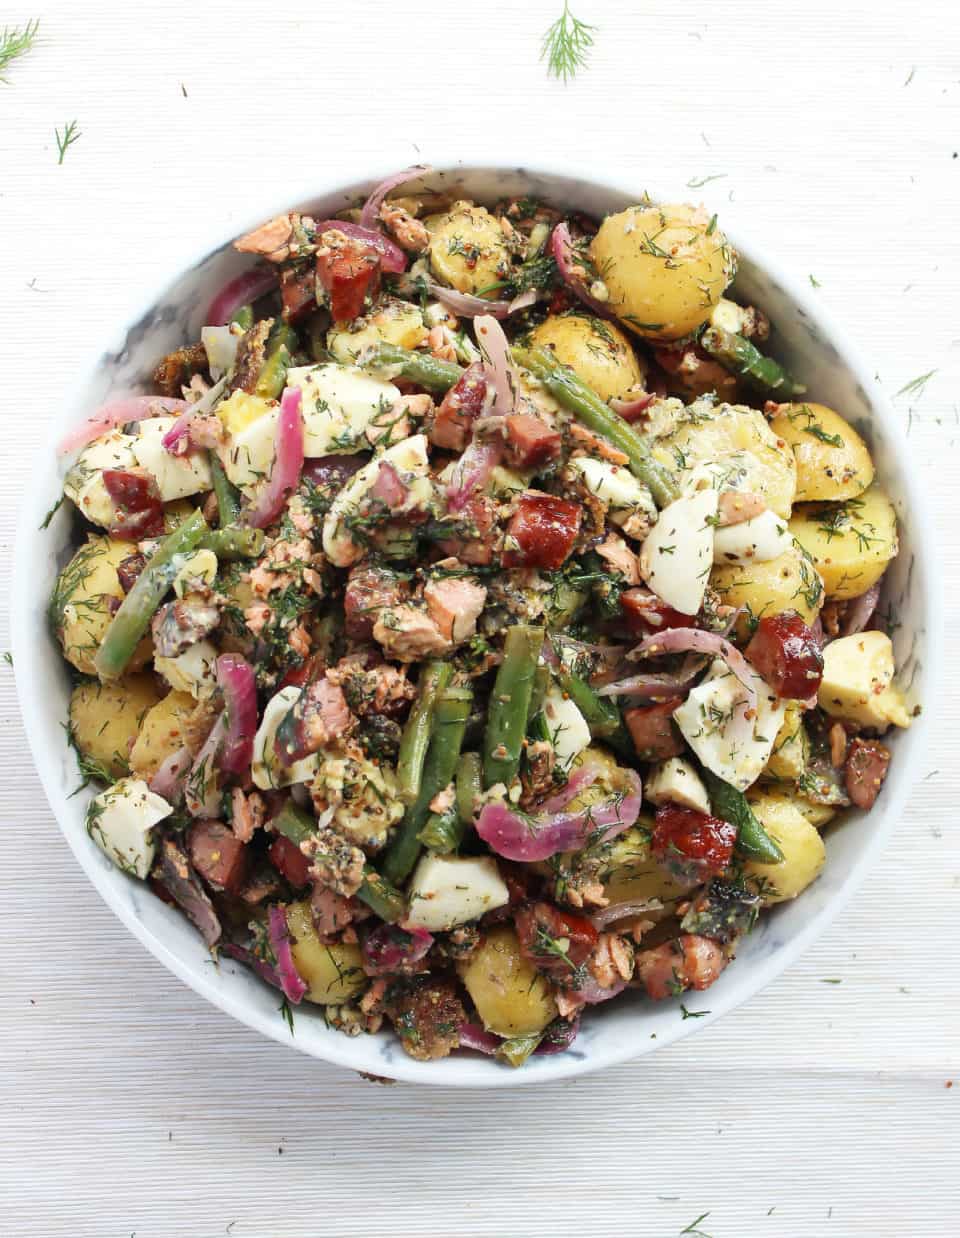 The potato salad garnished with fresh dill